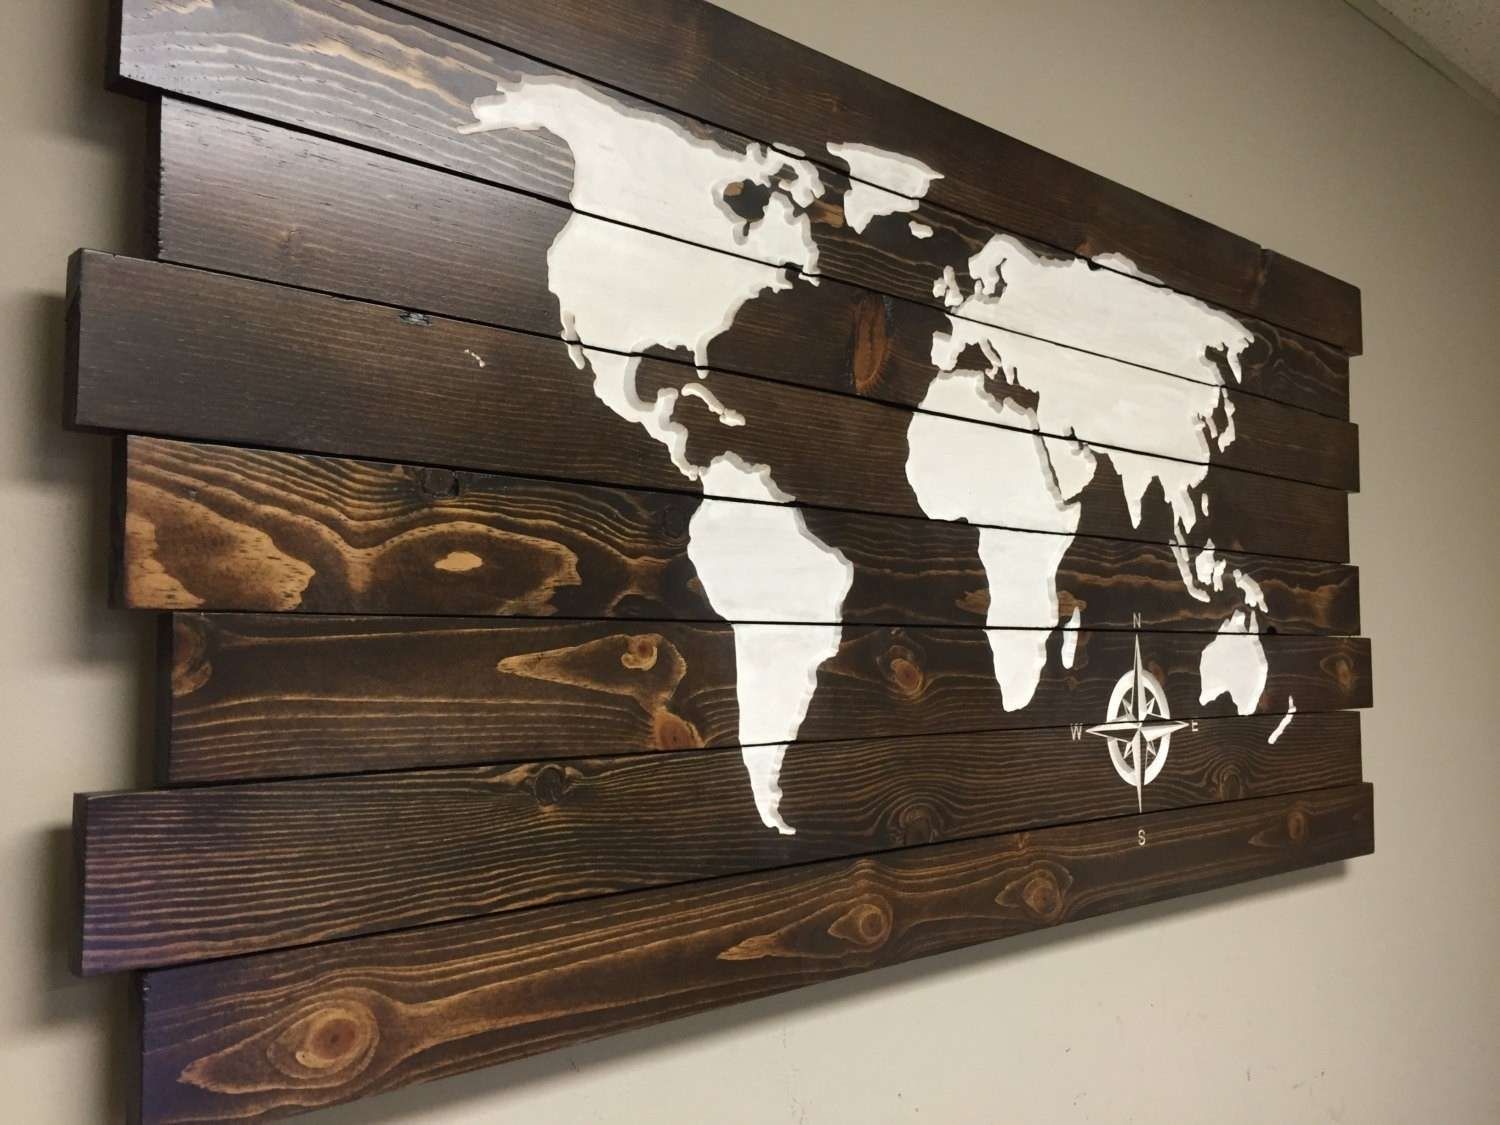 How To Hang Wood Art On Wall Beautiful World Map Wood Wall Art Within World Map Wood Wall Art (View 5 of 20)